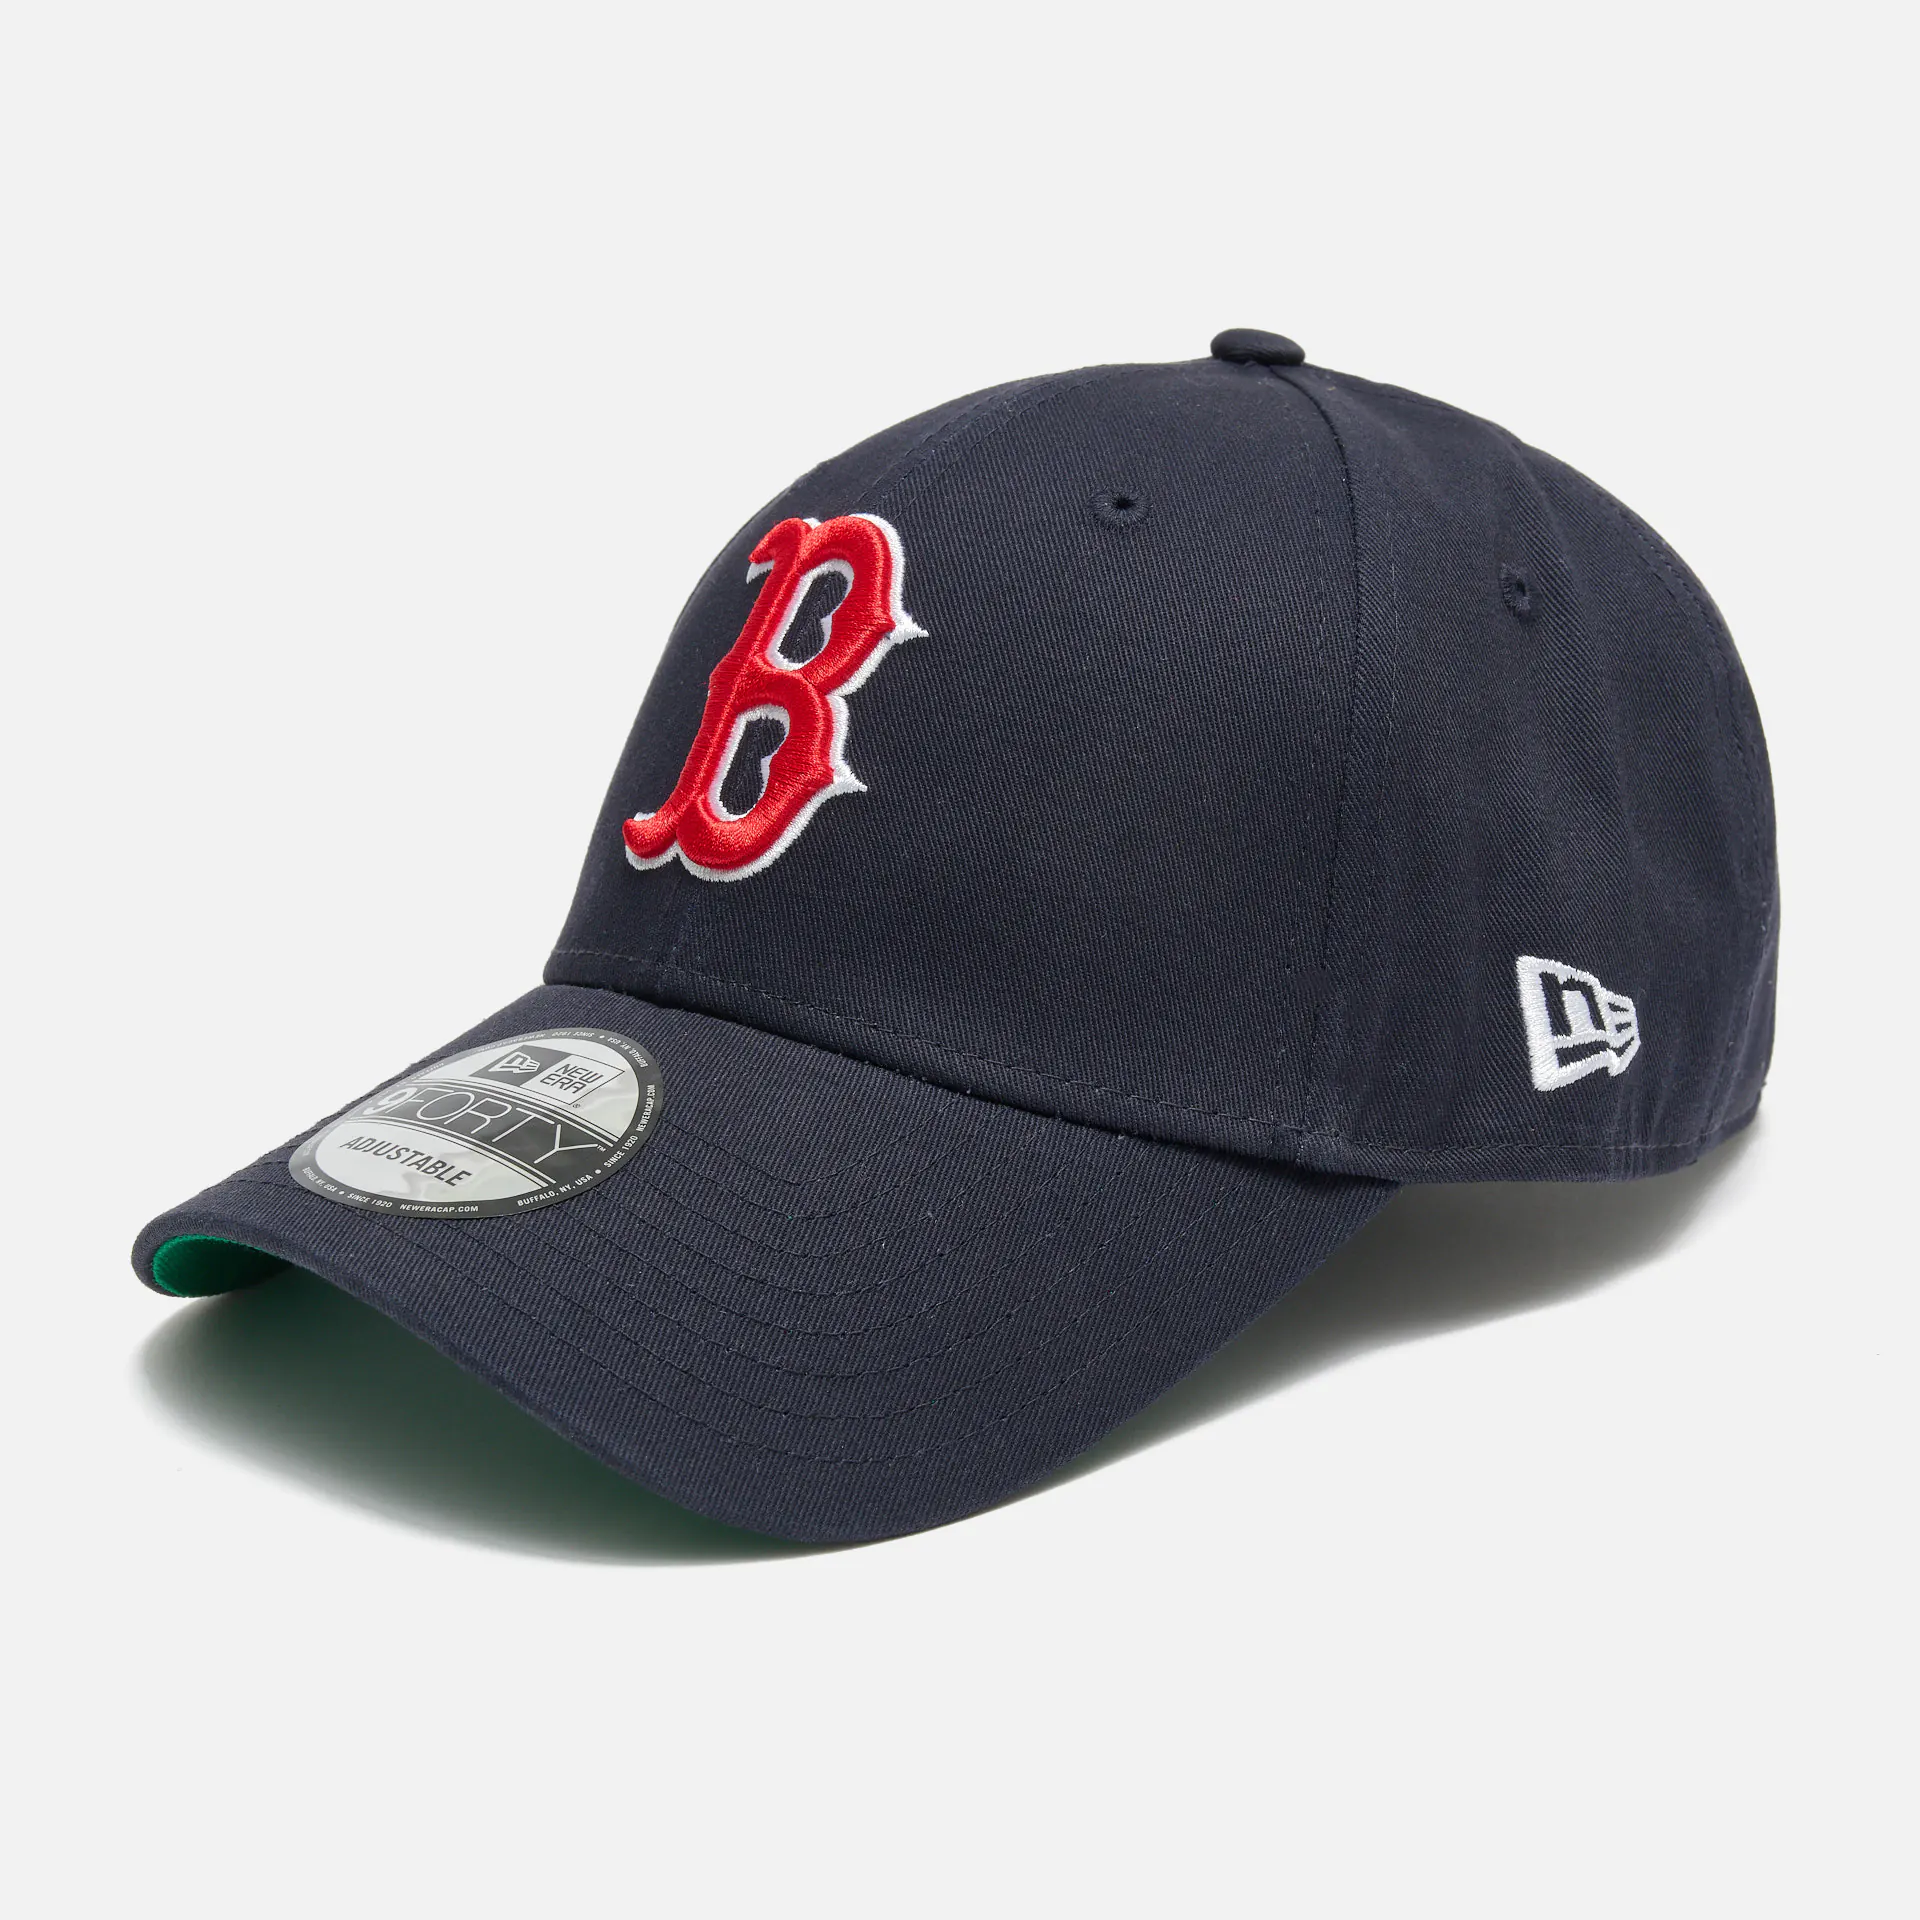 New Era MLB Boston Red Sox Team Side Patch 9Forty Strapback Cap Navy NVYSCA